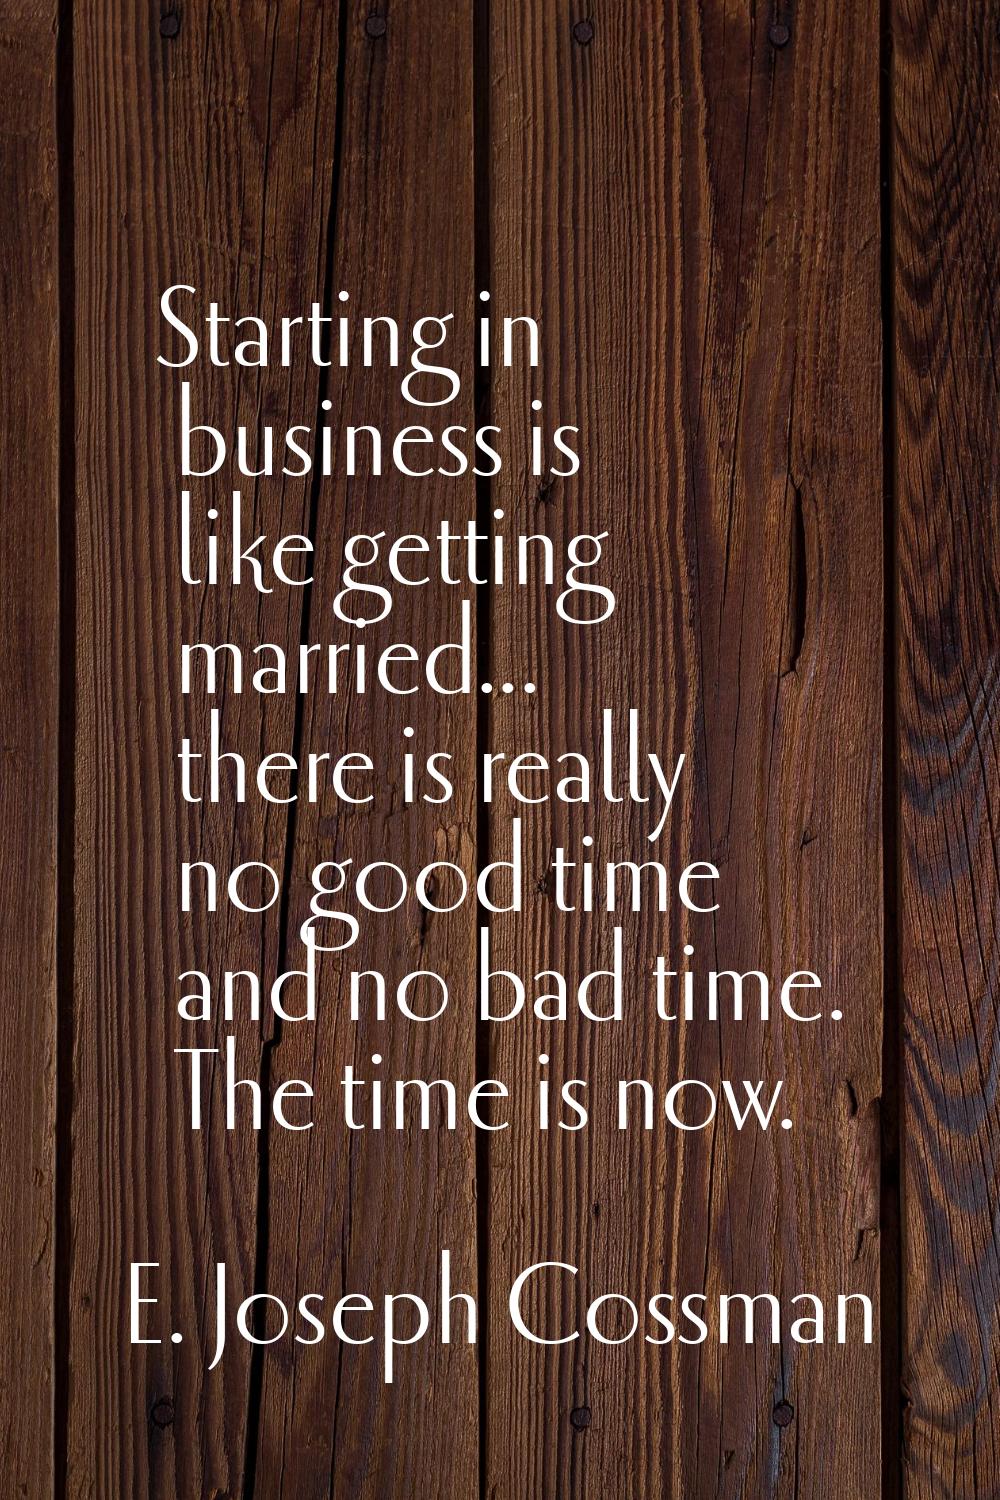 Starting in business is like getting married... there is really no good time and no bad time. The t